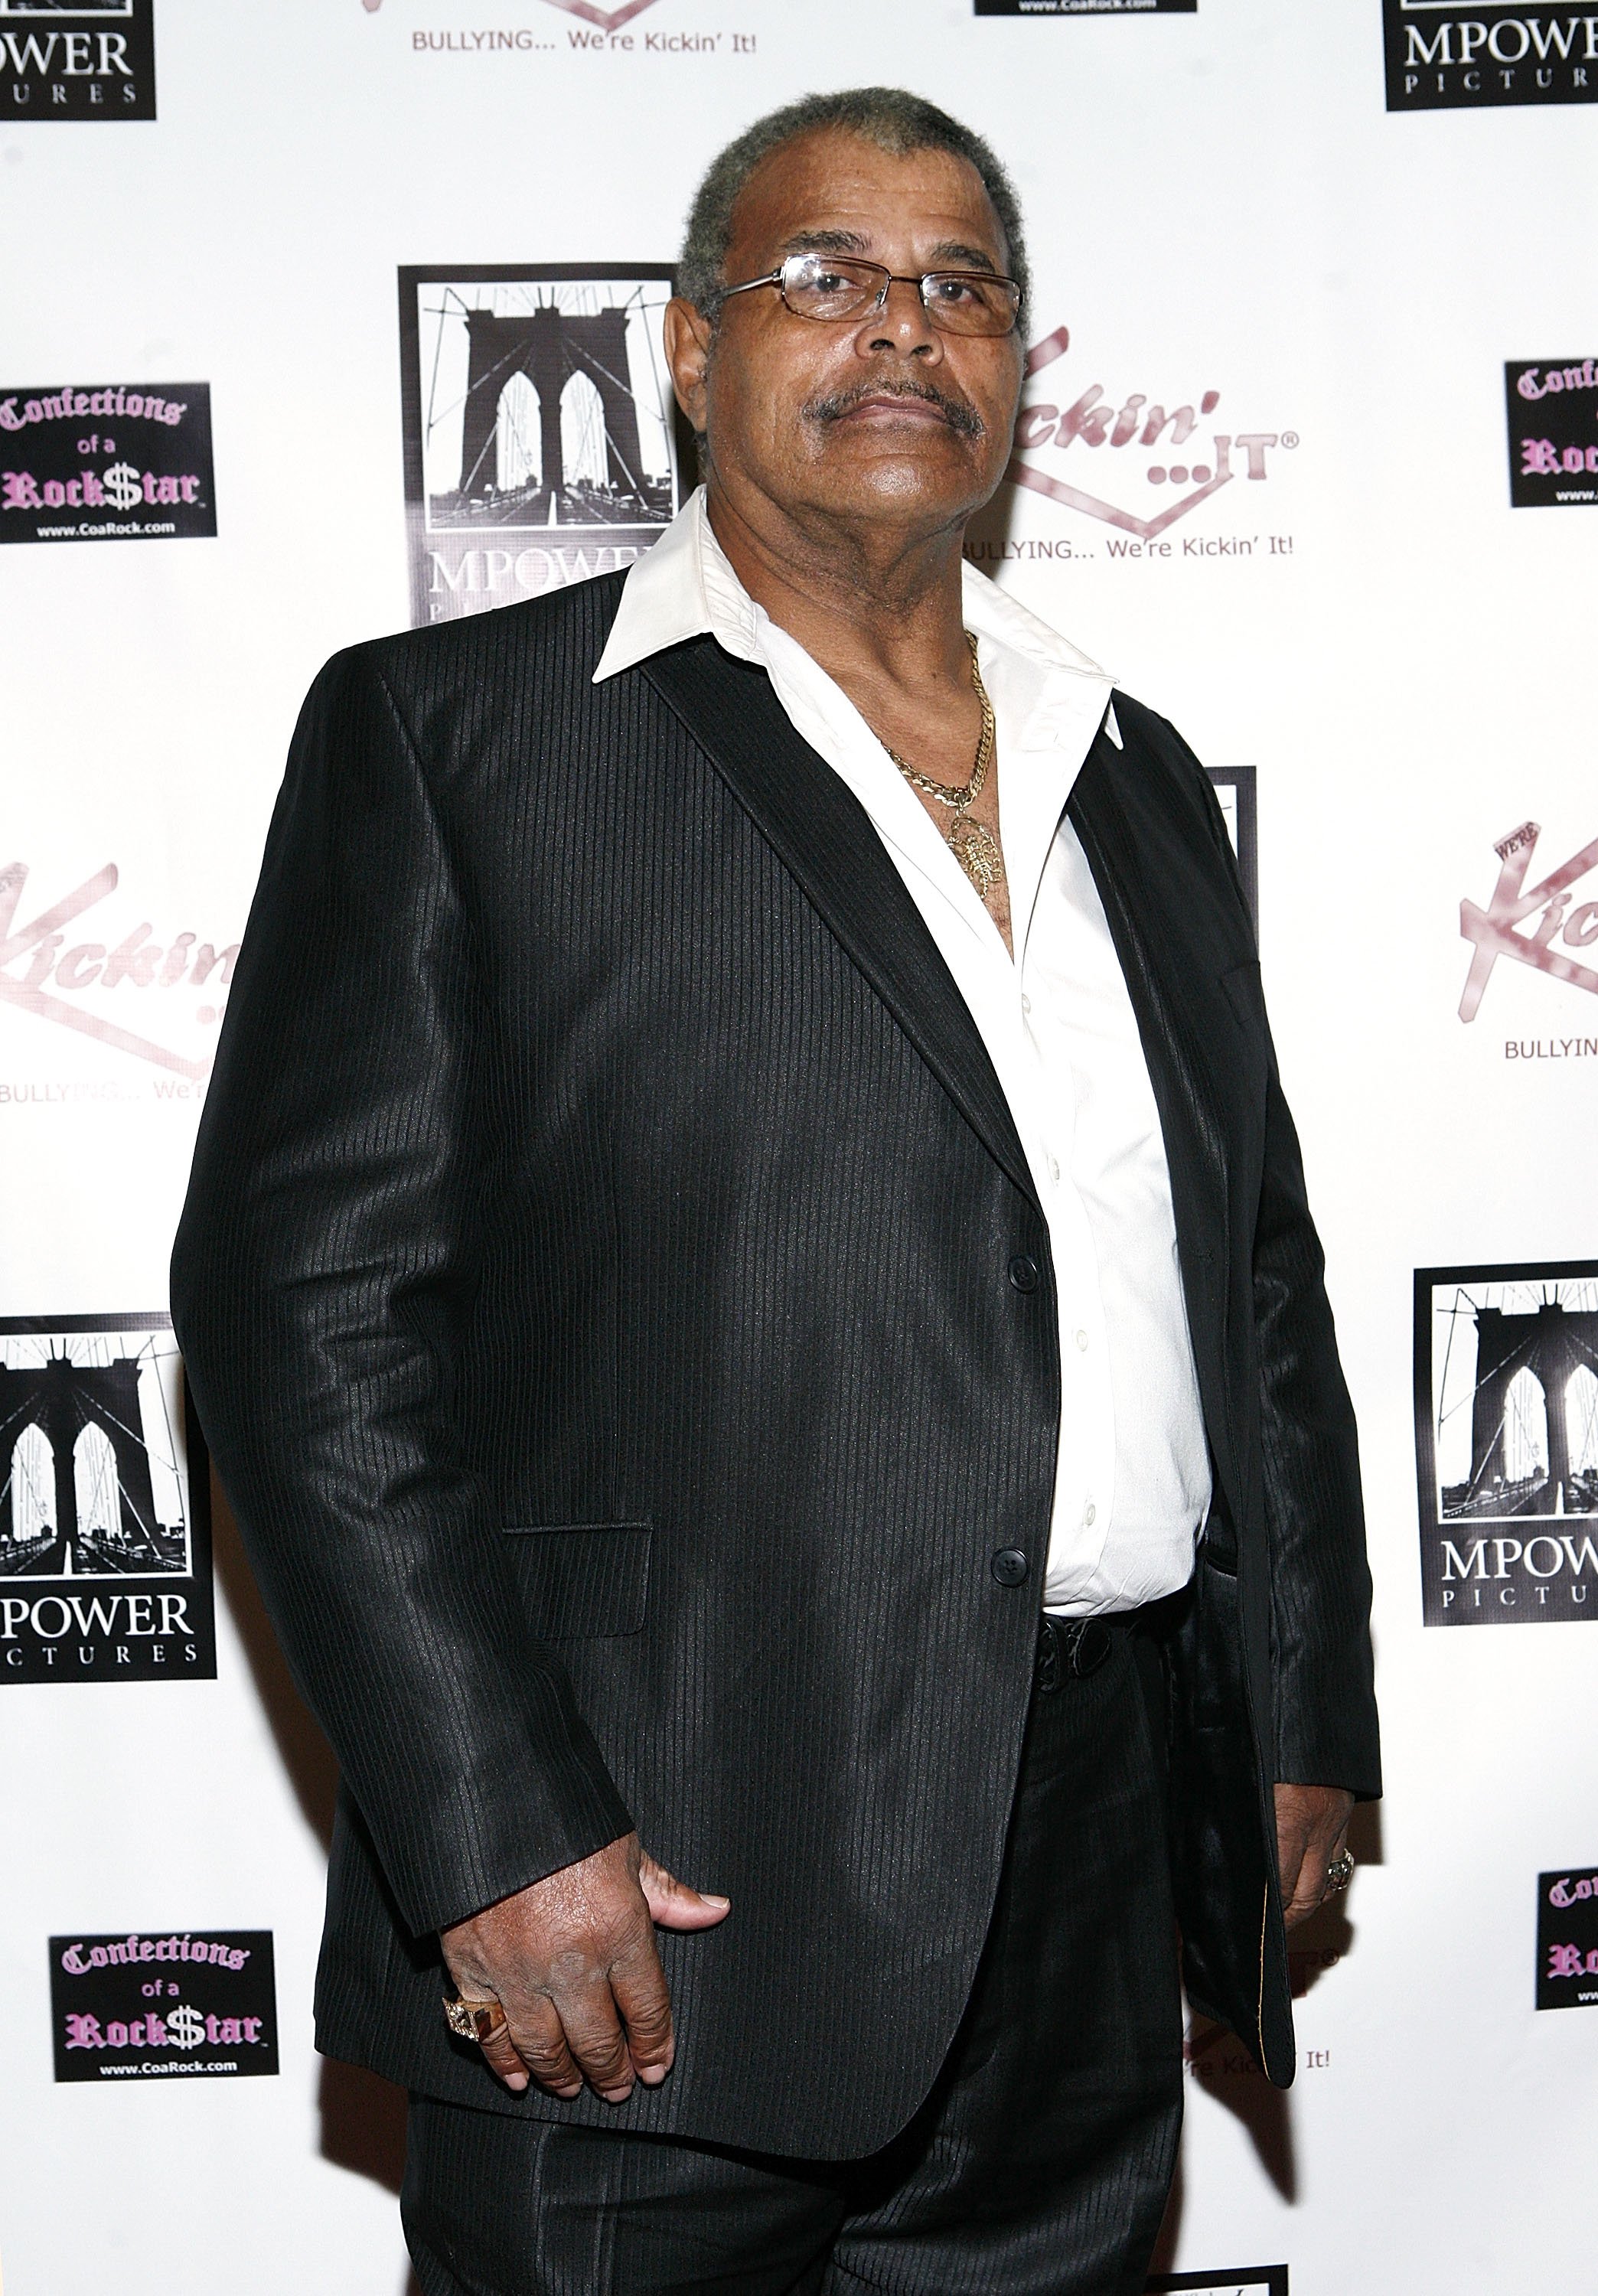  Rocky Johnson attends Unite in the Fight... to Knockout Bullying at the Hard Rock Cafe New York on October 20, 2011. | Photo: Getty Images